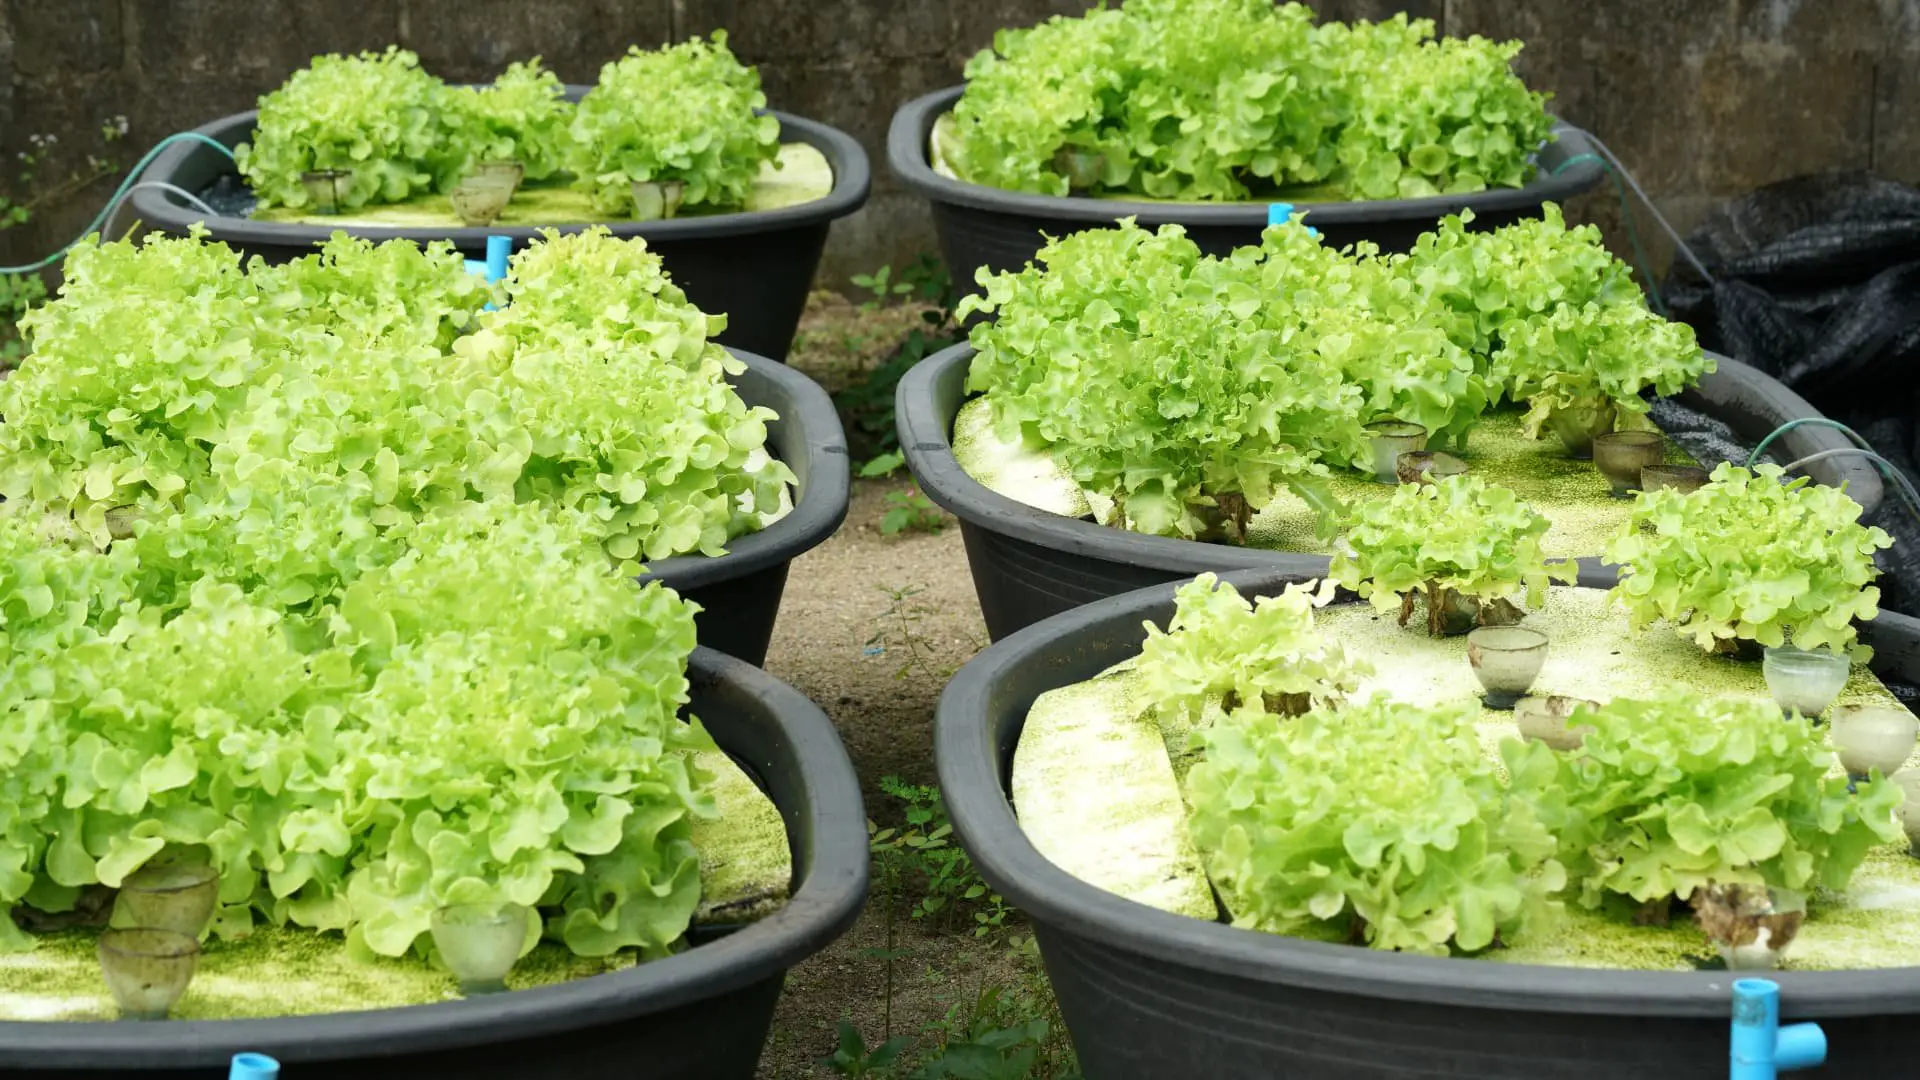 % Understand how the Deep Water Culture Hydroponic system works before growing fruits, vegetables, and herbs in your home or office. It is a good farming method and what are its pros and cons?